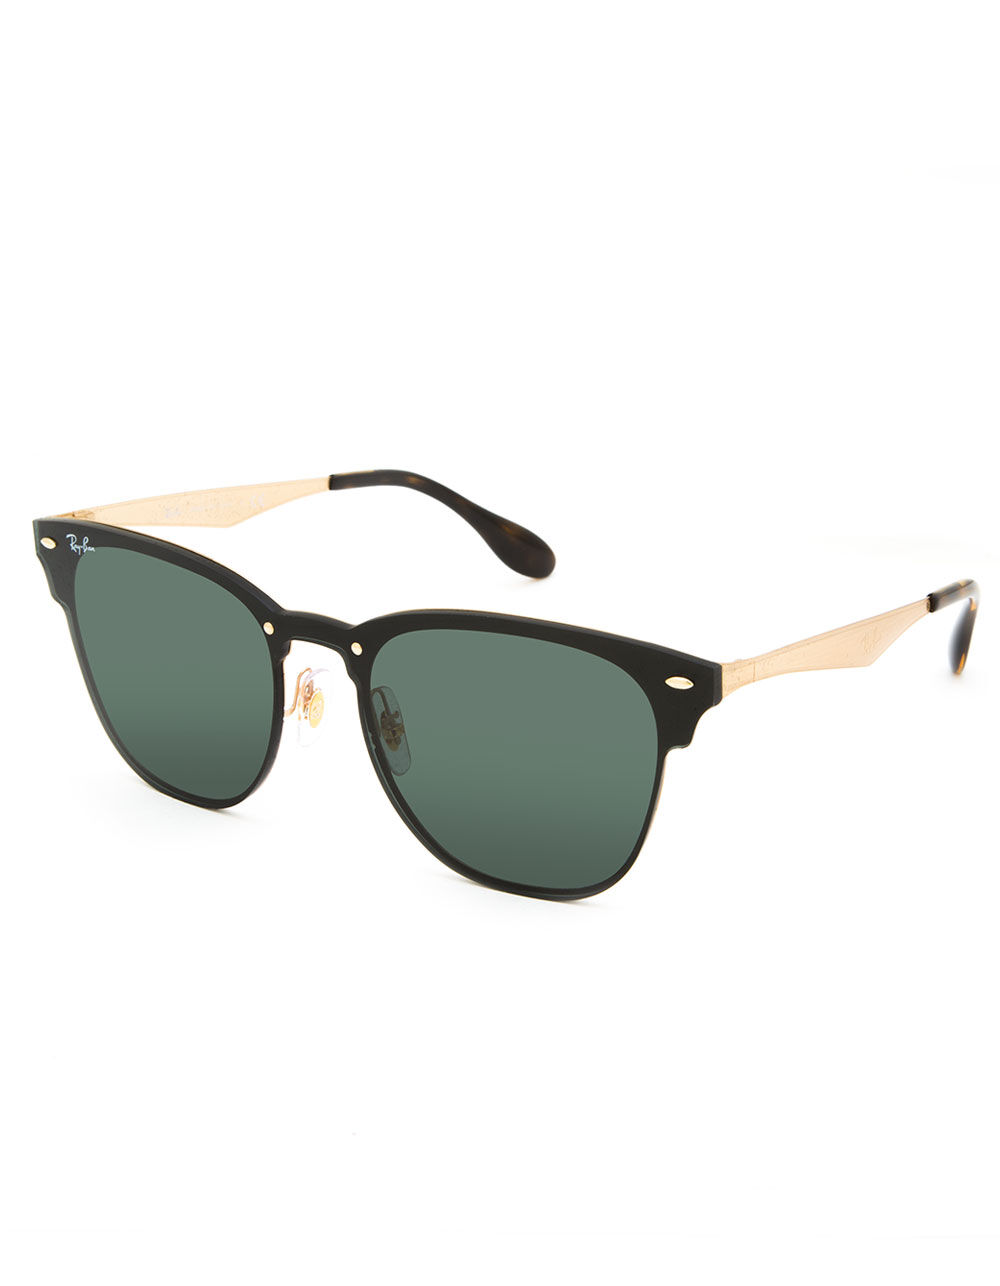 Ray-Ban Clubmaster Sunglasses: Polarized & Classic | Tillys